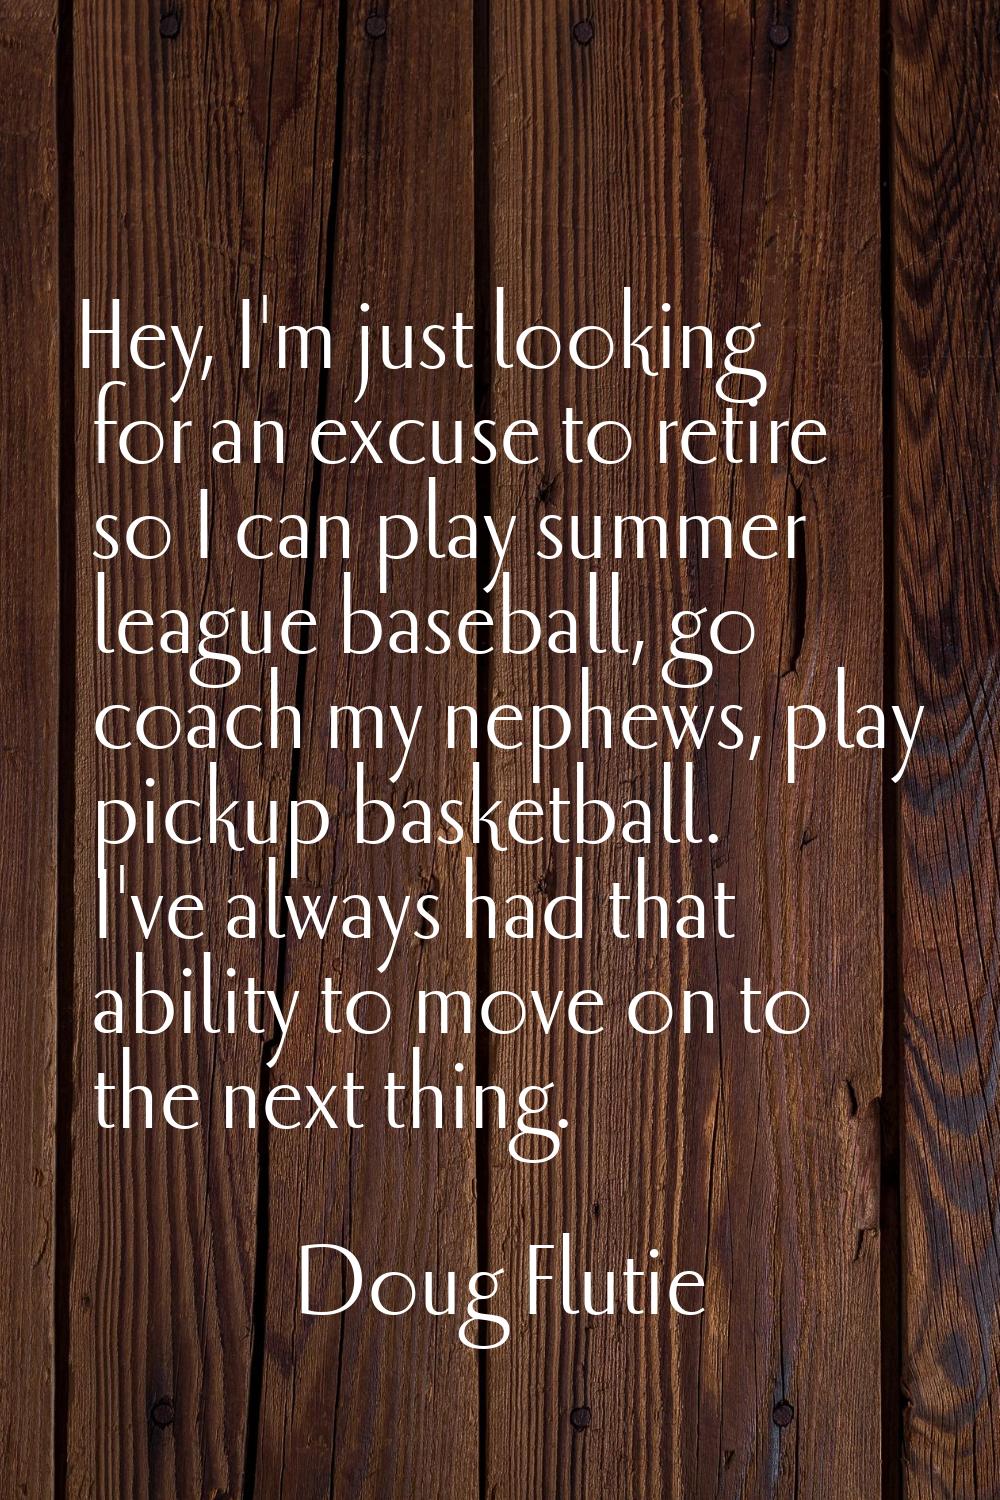 Hey, I'm just looking for an excuse to retire so I can play summer league baseball, go coach my nep